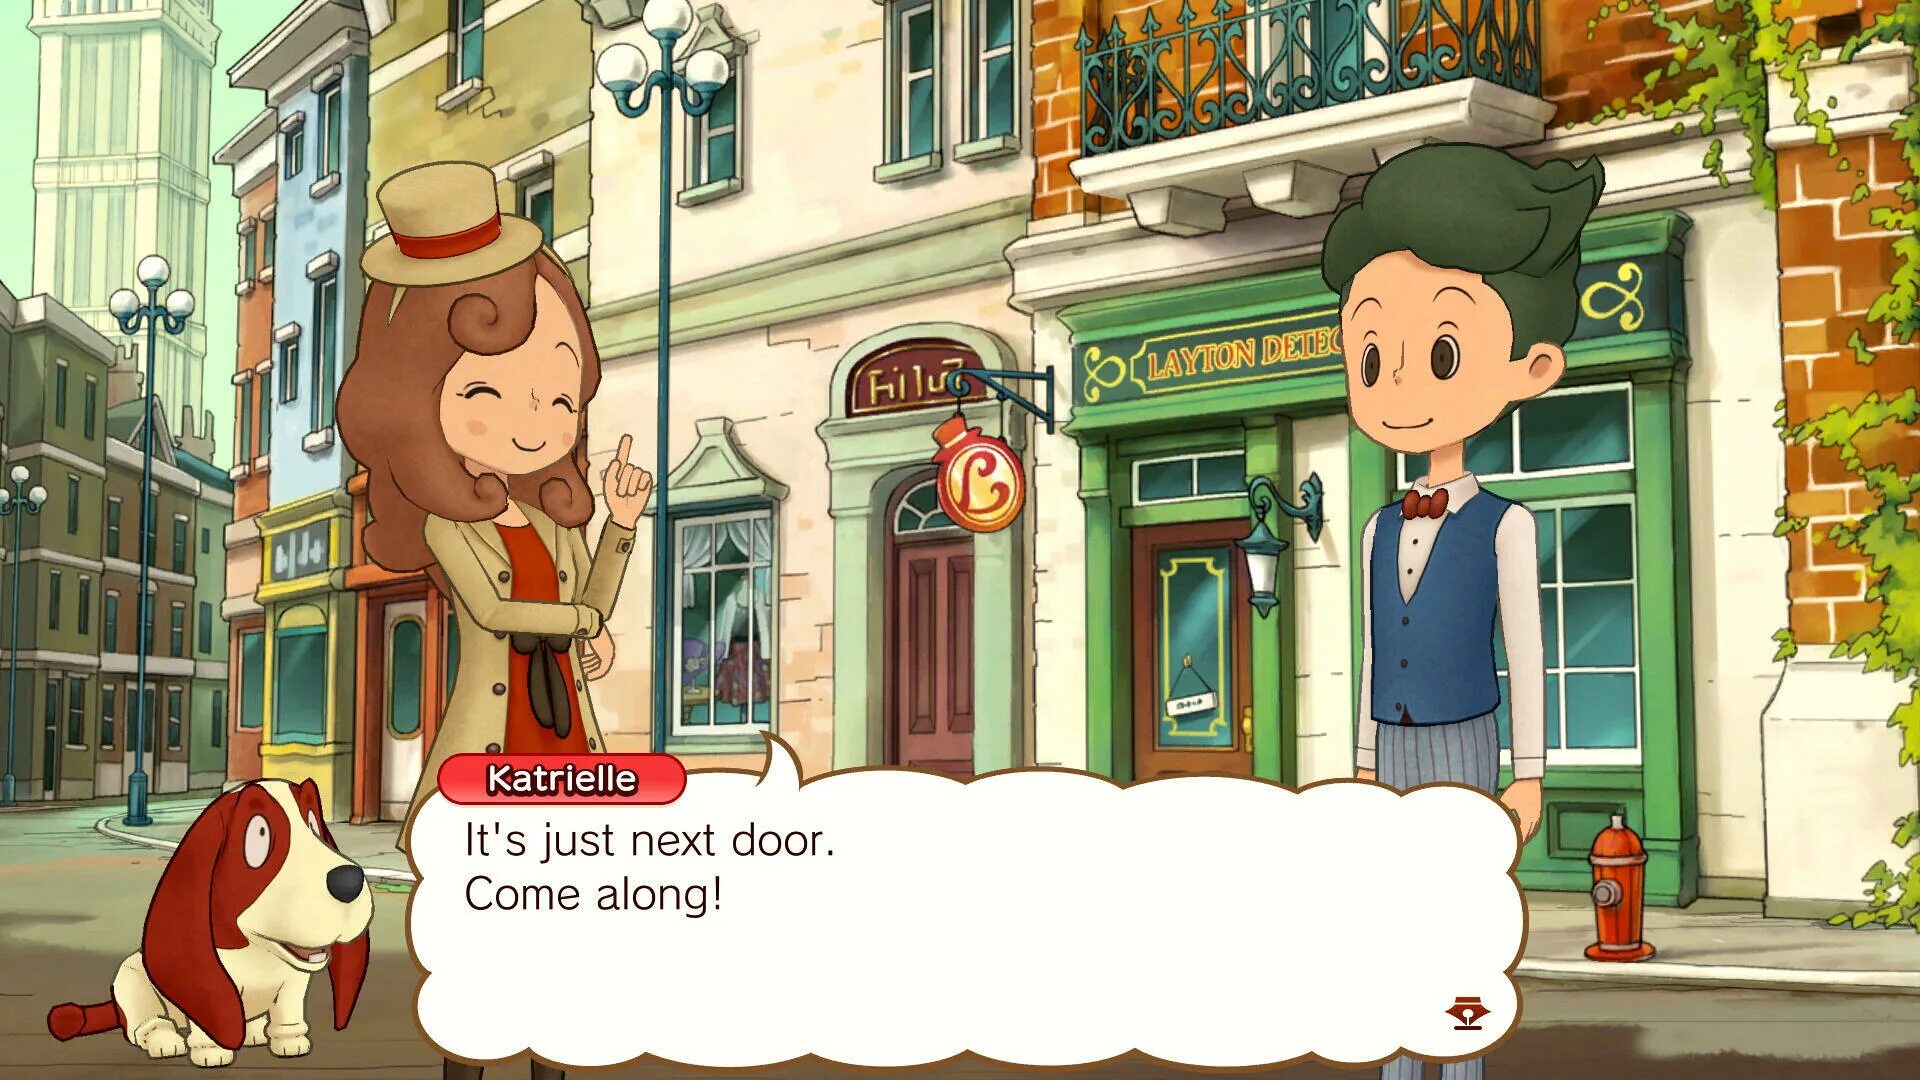 Mystery journey. Laytons Mystery Journey Katrielle. Layton's Mystery Journey. Layton's Mystery Journey: Katrielle and the Millionaires' Conspiracy. Layton Mystery Journey.